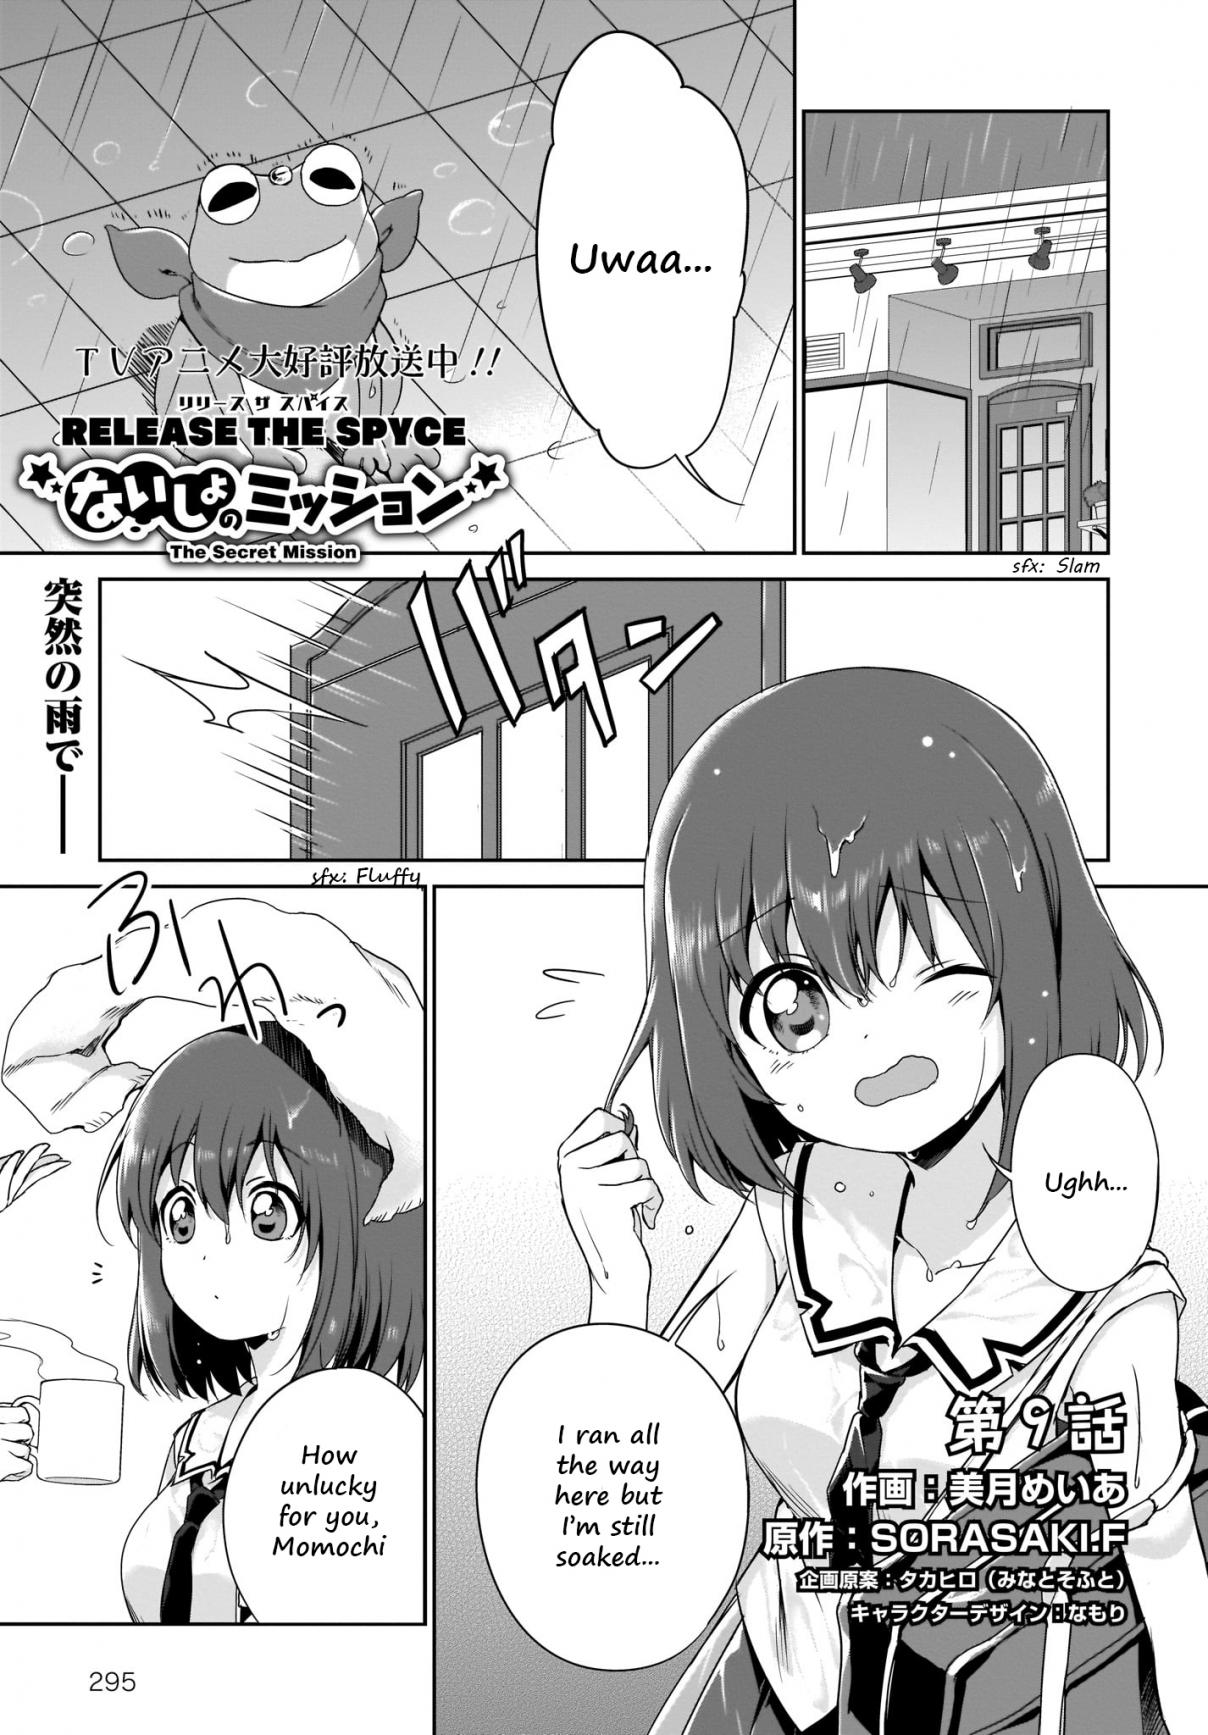 Release The Spyce: The Secret Mission Vol. 2 Ch. 9